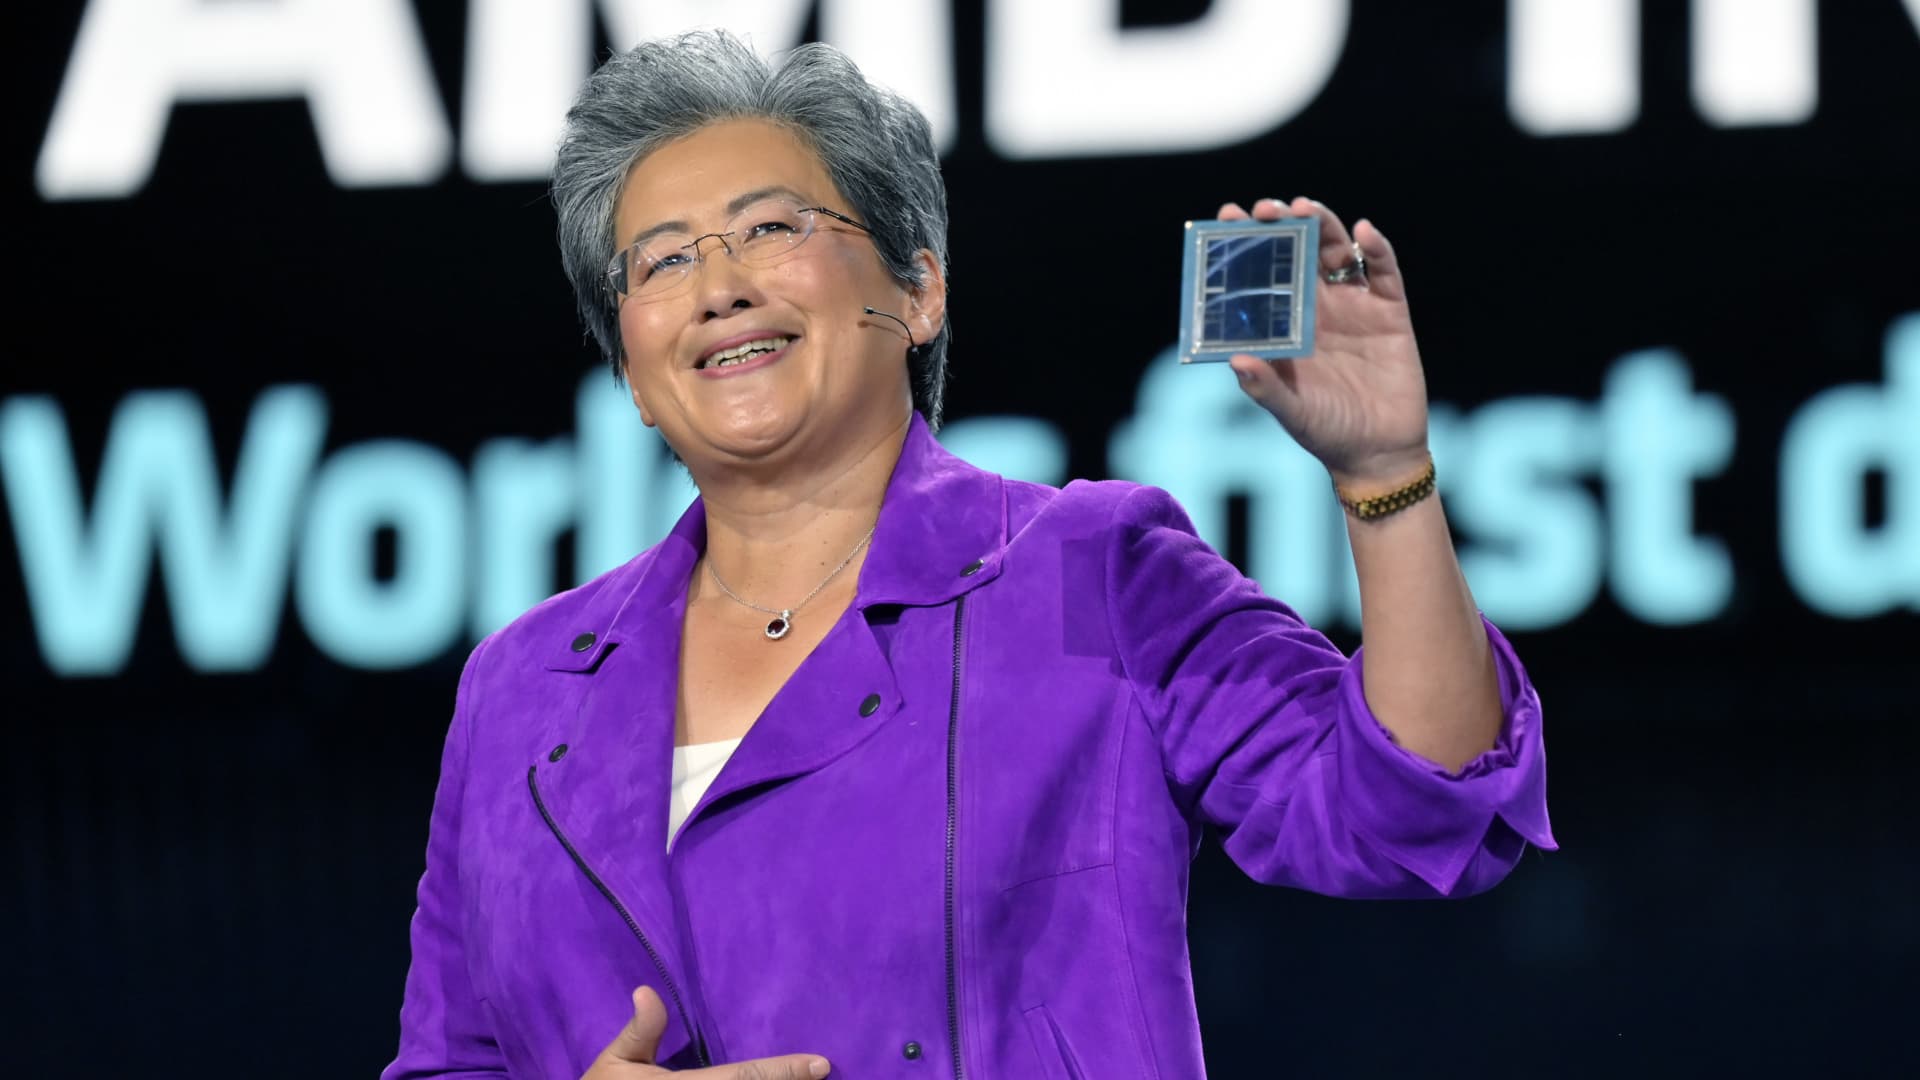 AMD stock spikes right after firm launches AI chip to rival Nvidia